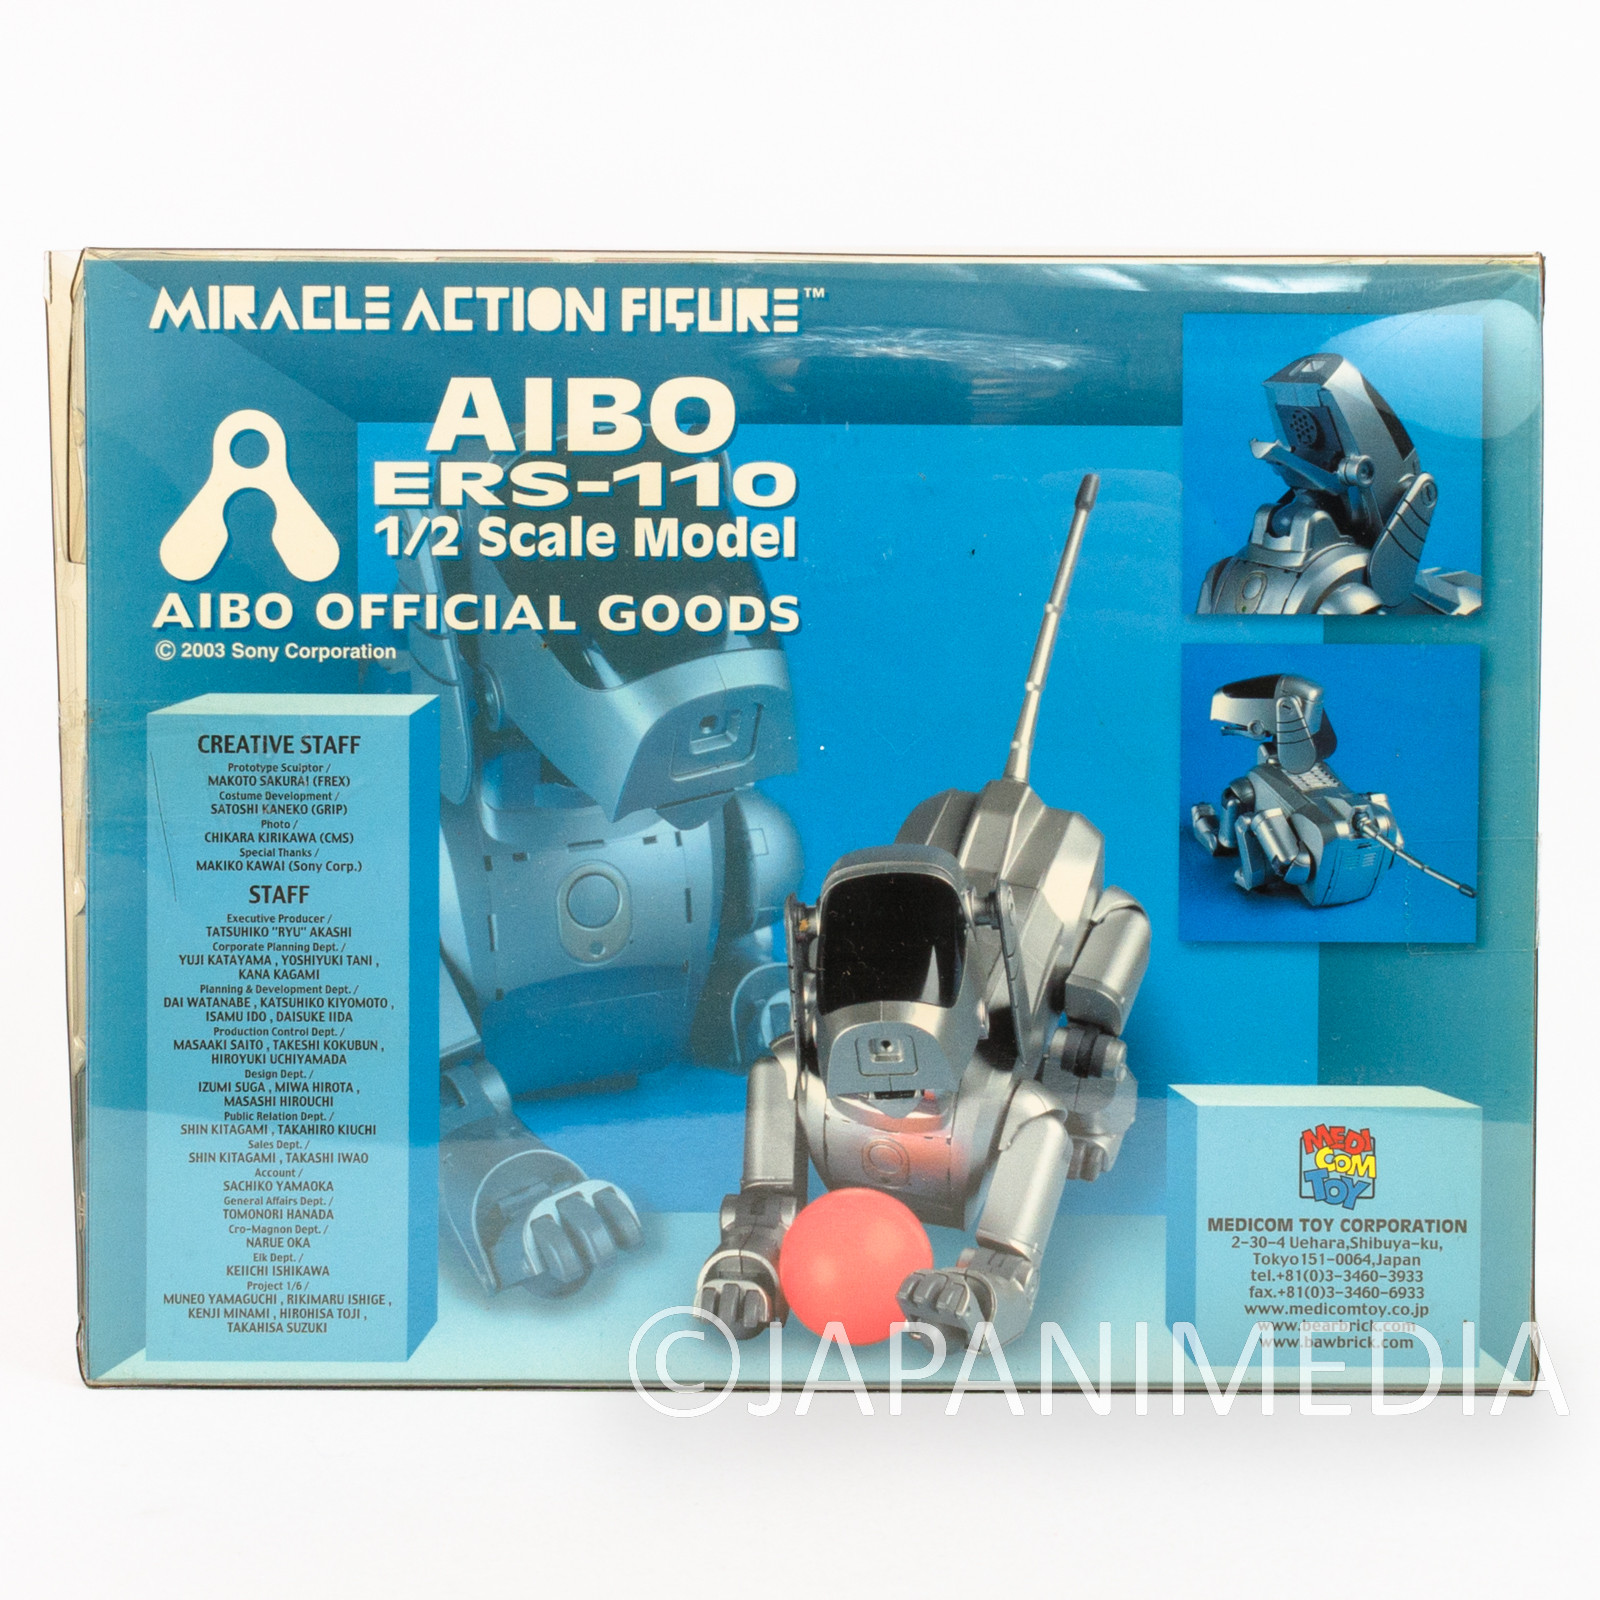 RARE! AIBO ERS-110 1/2 Scale Model Miracle Action Figure Medicom 